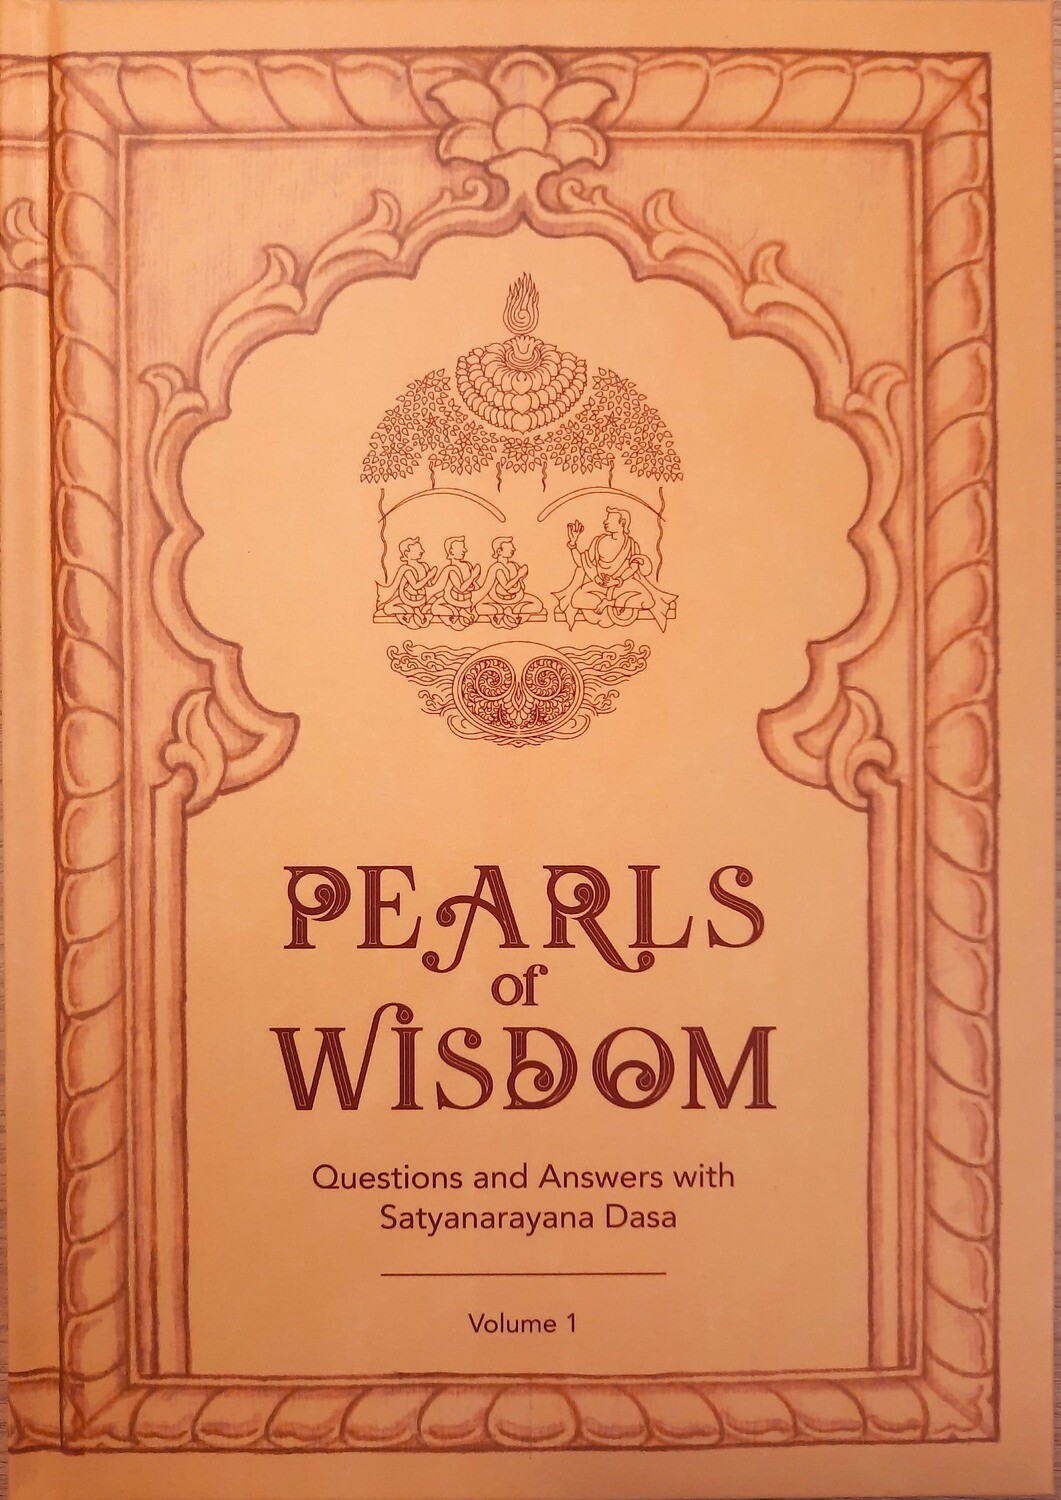 Pearls of Wisdom: Questions and Answers with Sri Satyanarayana Dasa